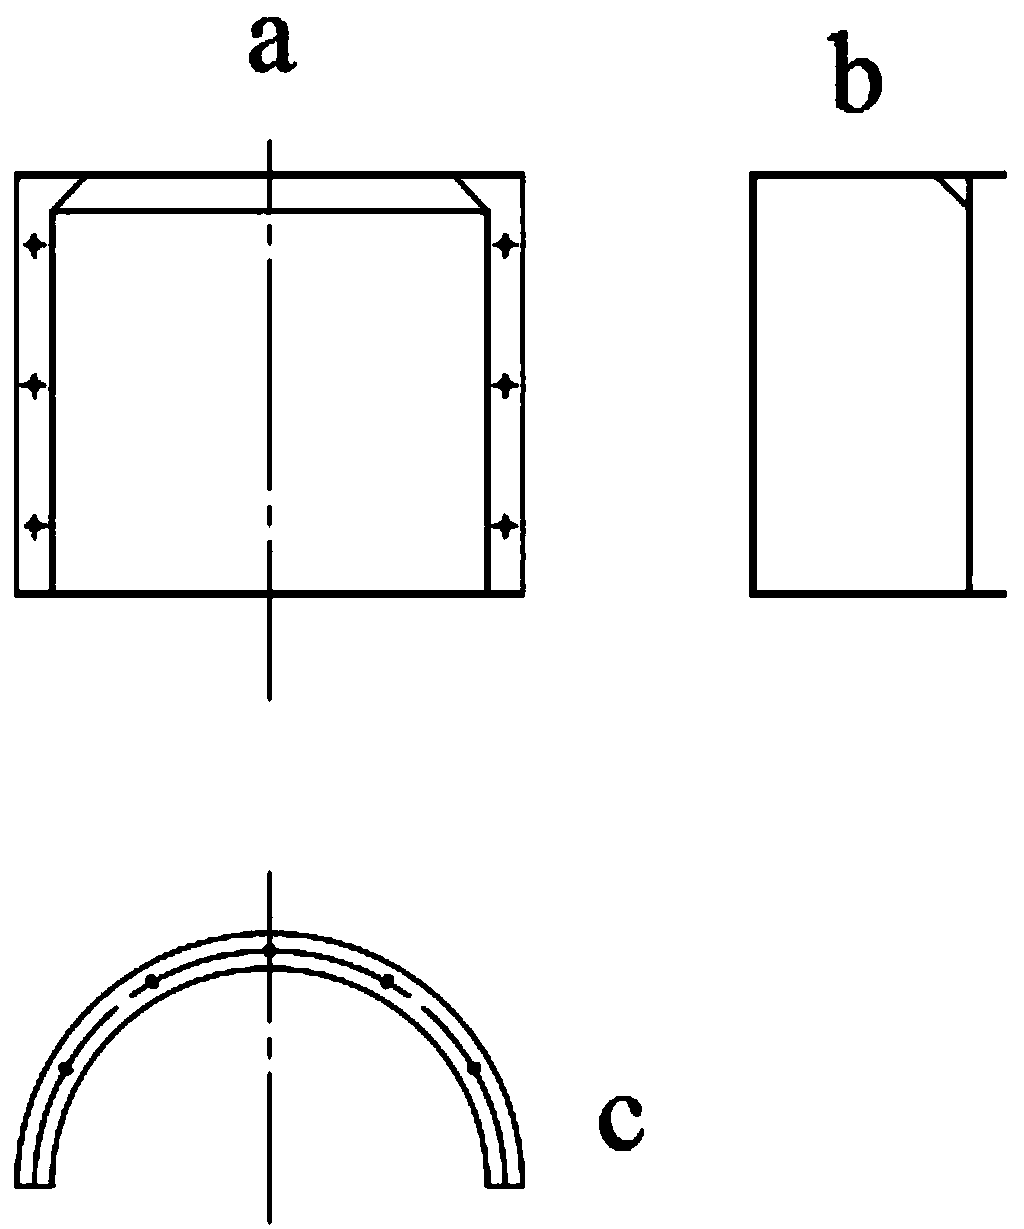 Mold for vertical stepped pouring of rotary kiln burner and pouring method of mold